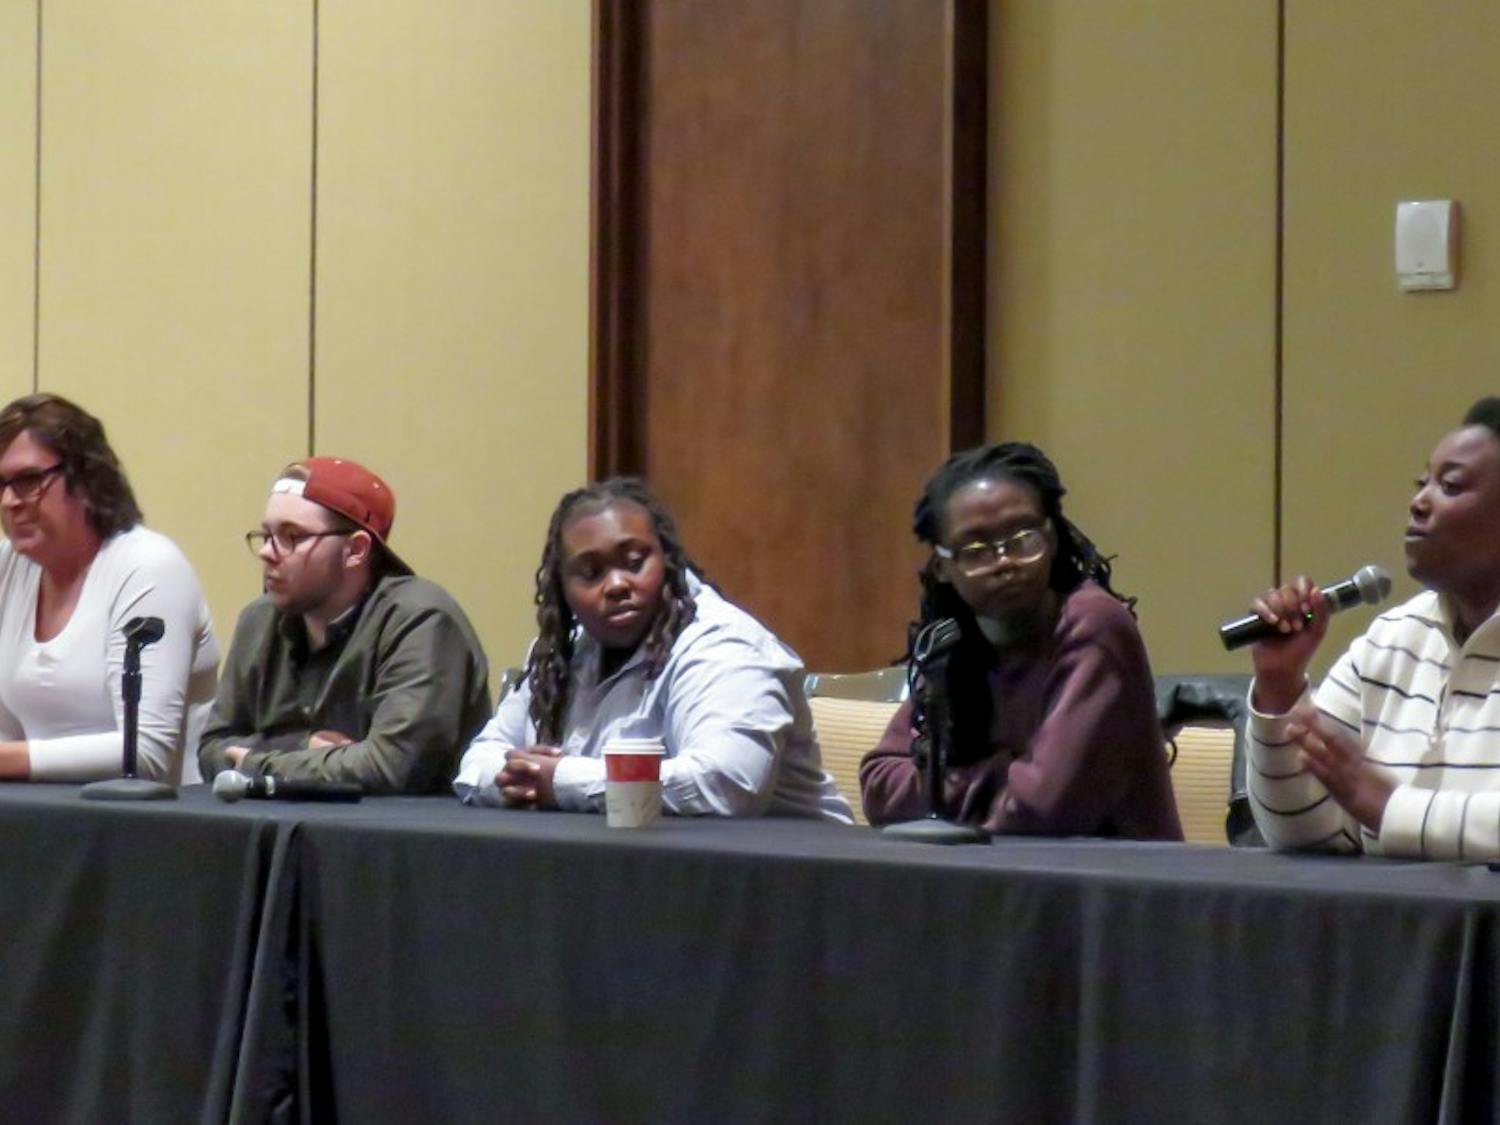 Transgender and gender non-conforming students and community members discuss their experiences on campus at a panel held at Union South Wednesday night.